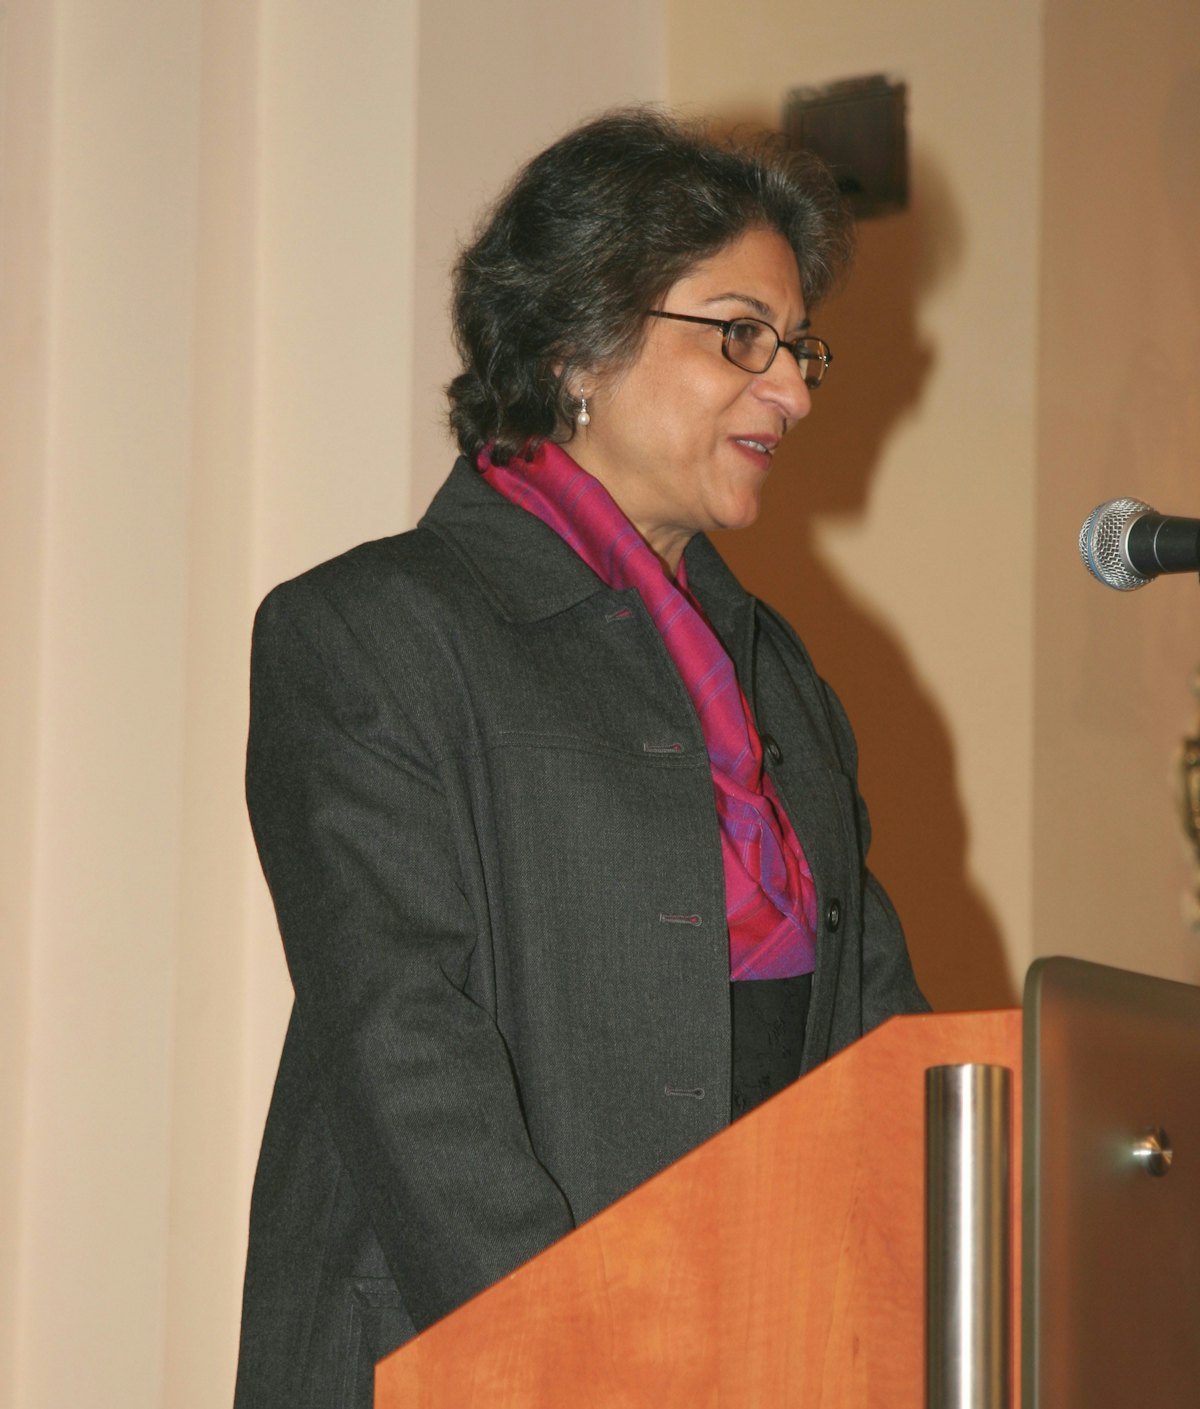 Asma Jahangir, the UN Special Rapporteur on freedom of religion or belief, speaking at the evening plenary on 25 November 2006. Photograph by Hamid Jahanpour